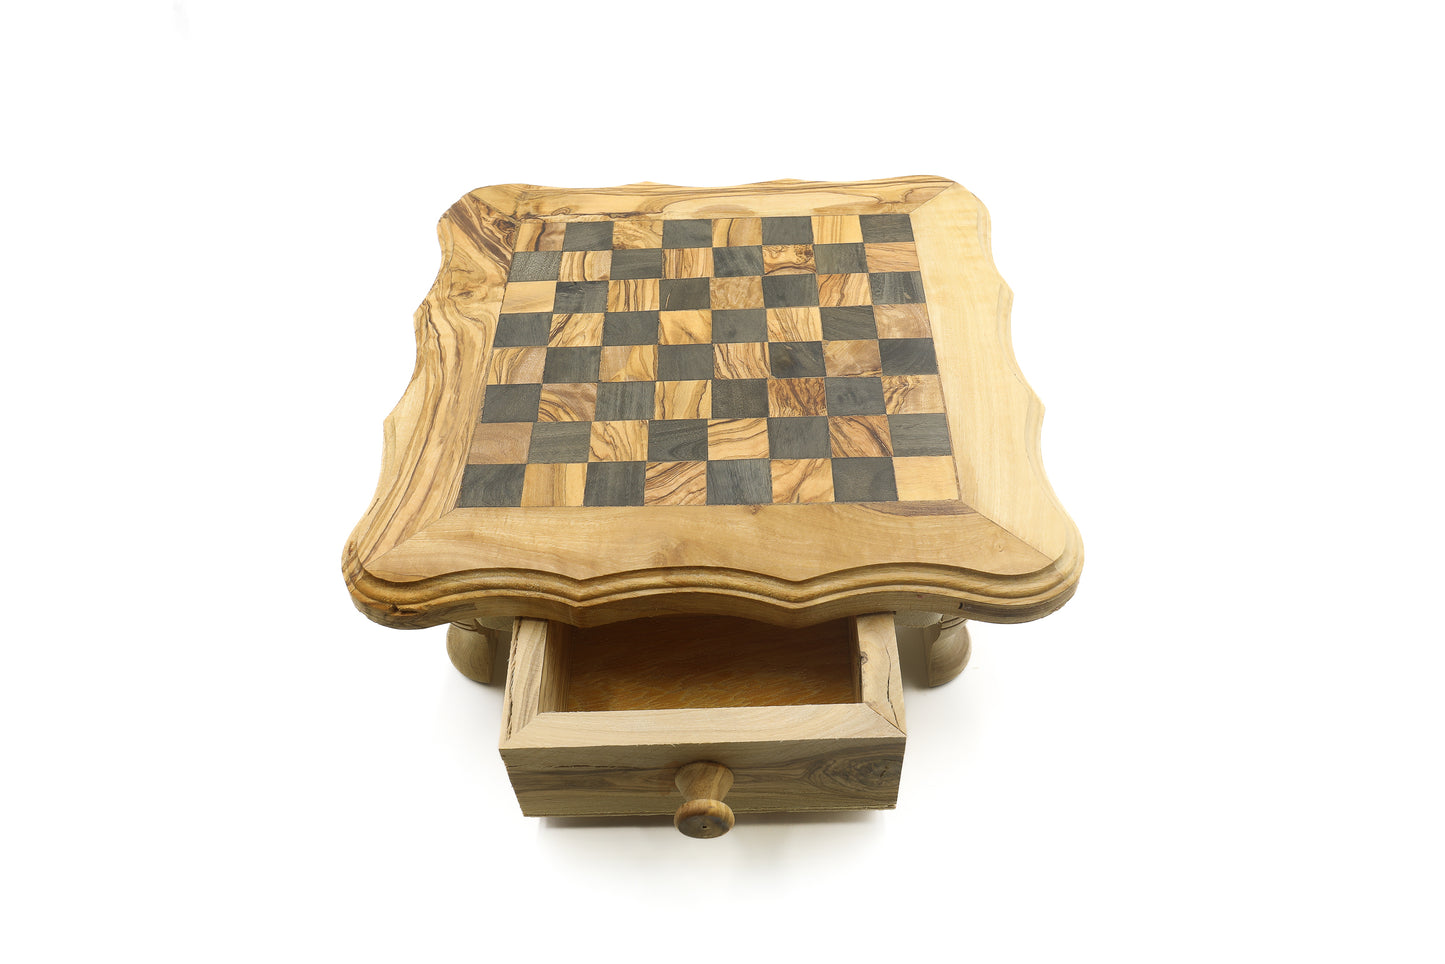 Durable and stylish olive wood chess set, including both board and pieces